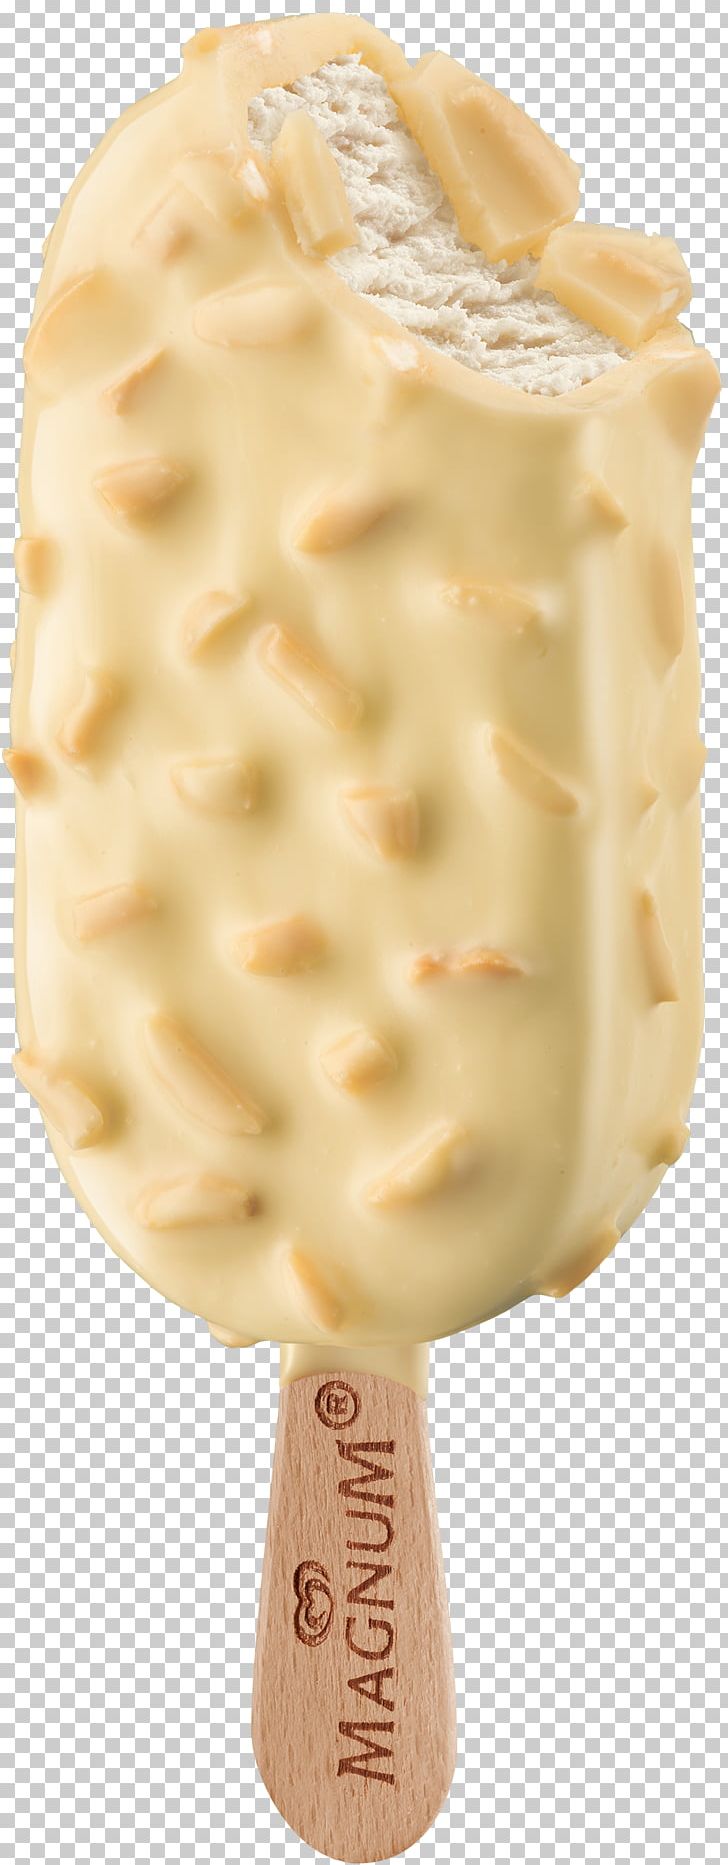 Ice Cream White Chocolate Magnum Wall's PNG, Clipart, Almond, Almonds, Chocolate, Chocolate Ice Cream, Dairy Product Free PNG Download